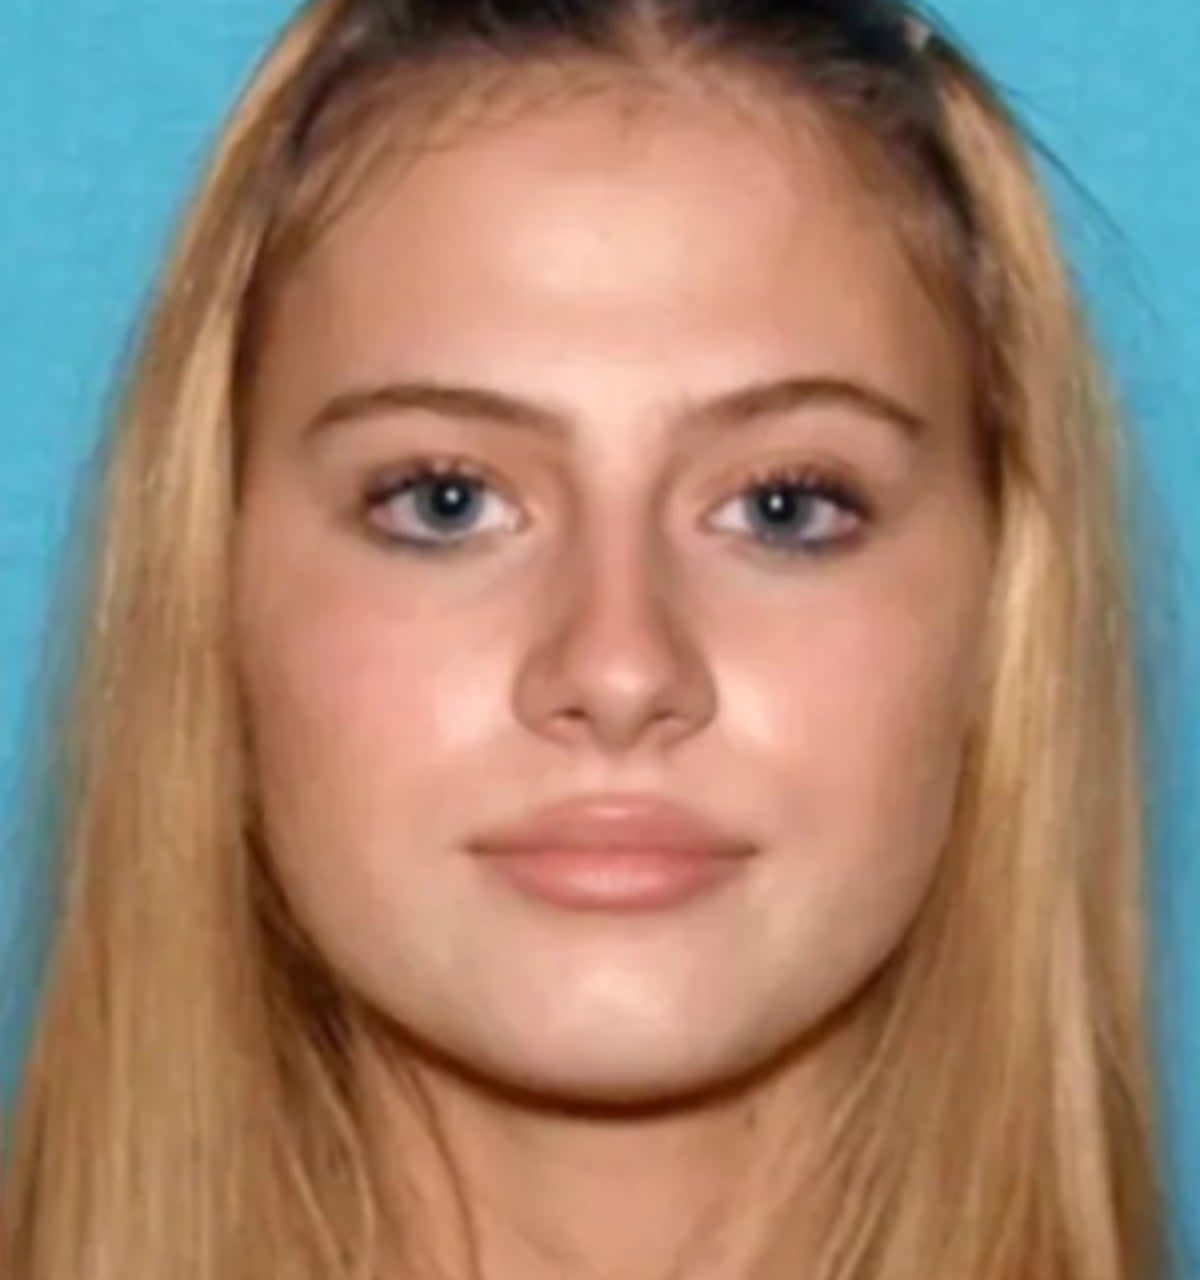 Katie Schneider has been missing since 5 July. Her car was found on Monday (Santa Clara County Sheriff’s Office)